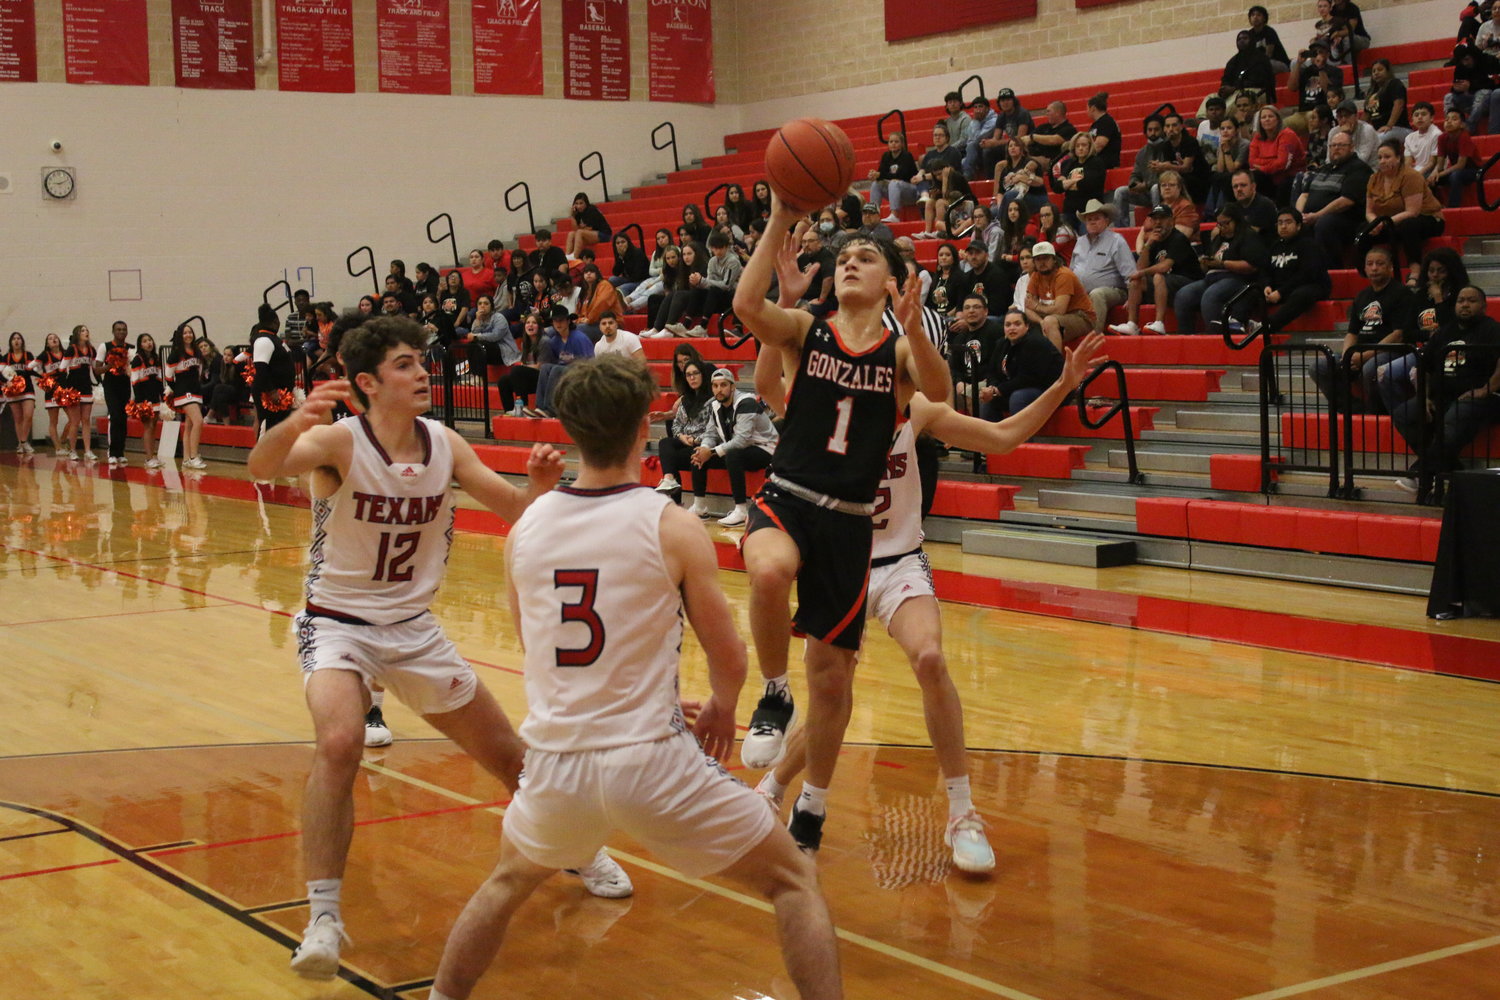 Senior Brady Barfield puts up a shot on a drive against the Texans in Tuesday’s bi-district playoff game. Barfield scored 15 points and hit four three-pointers in the game.